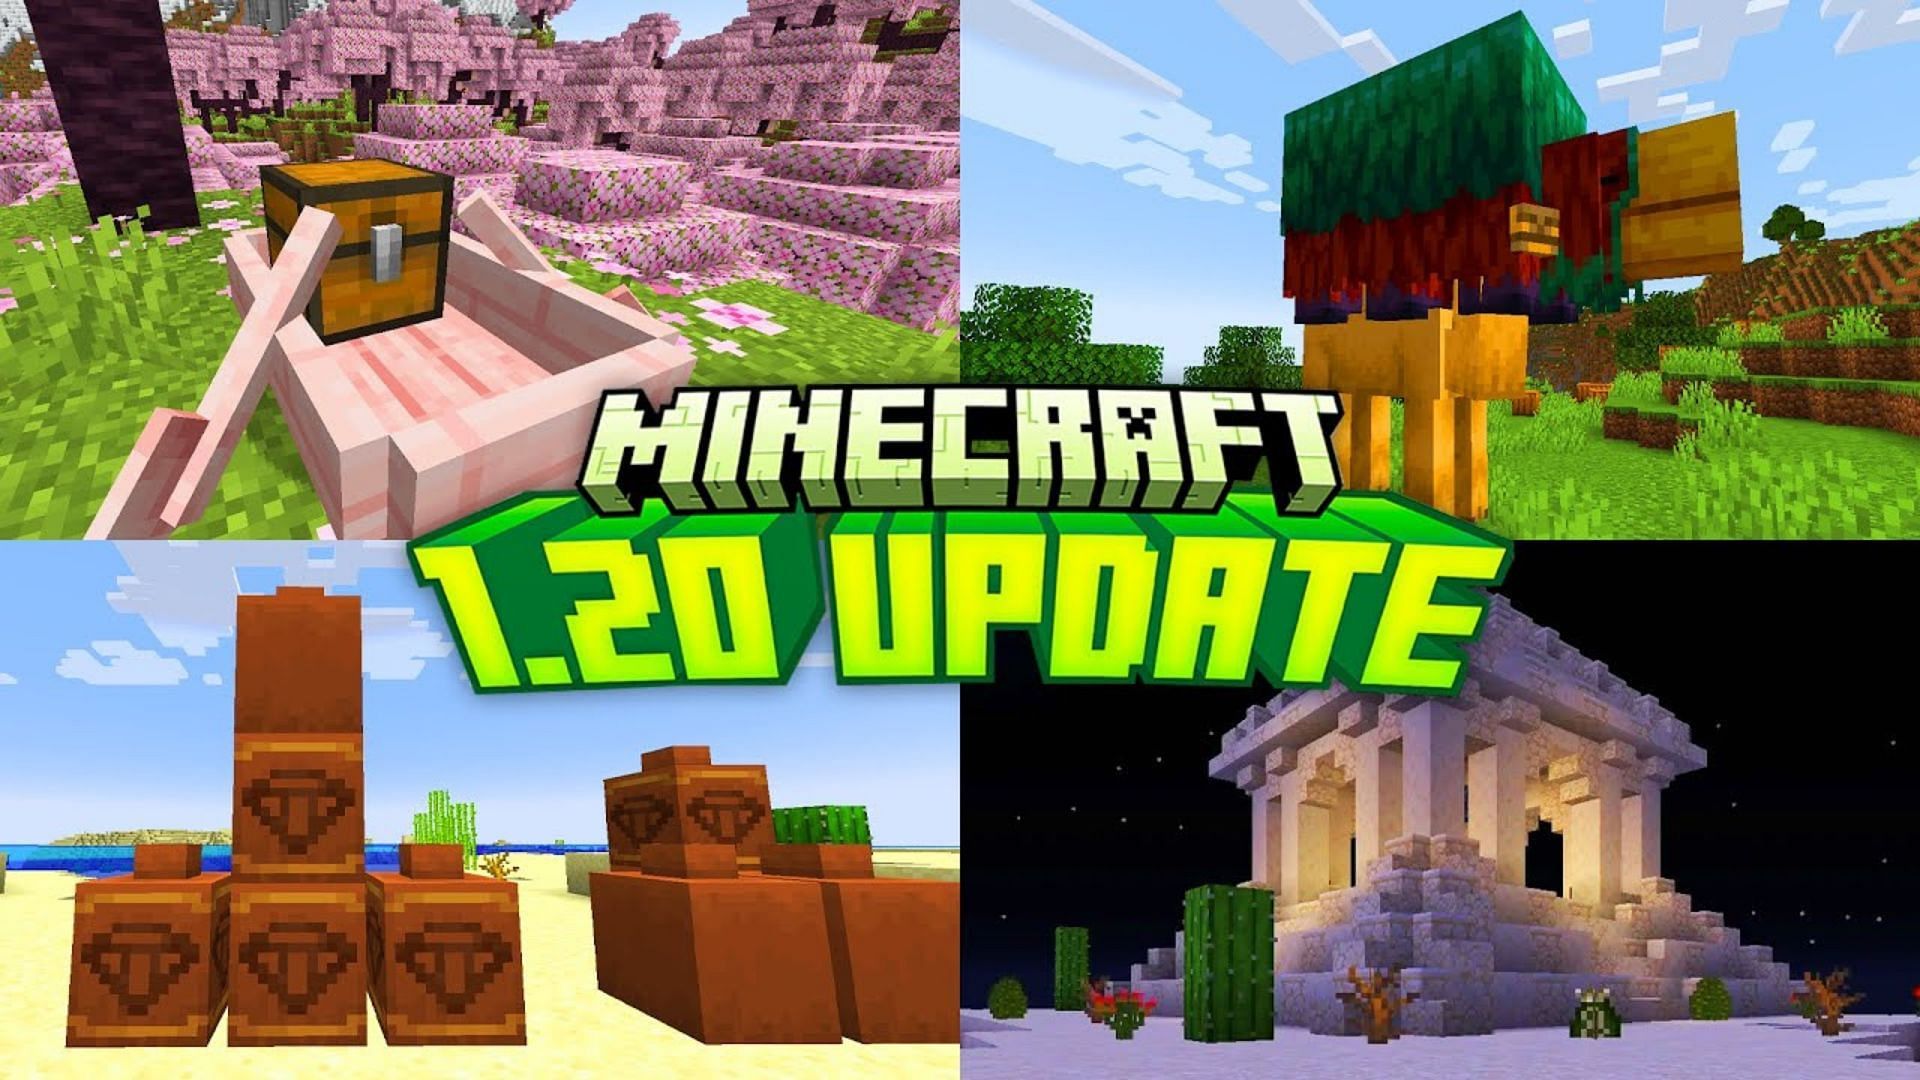 Minecraft 1.20.30 update patch notes add crawling